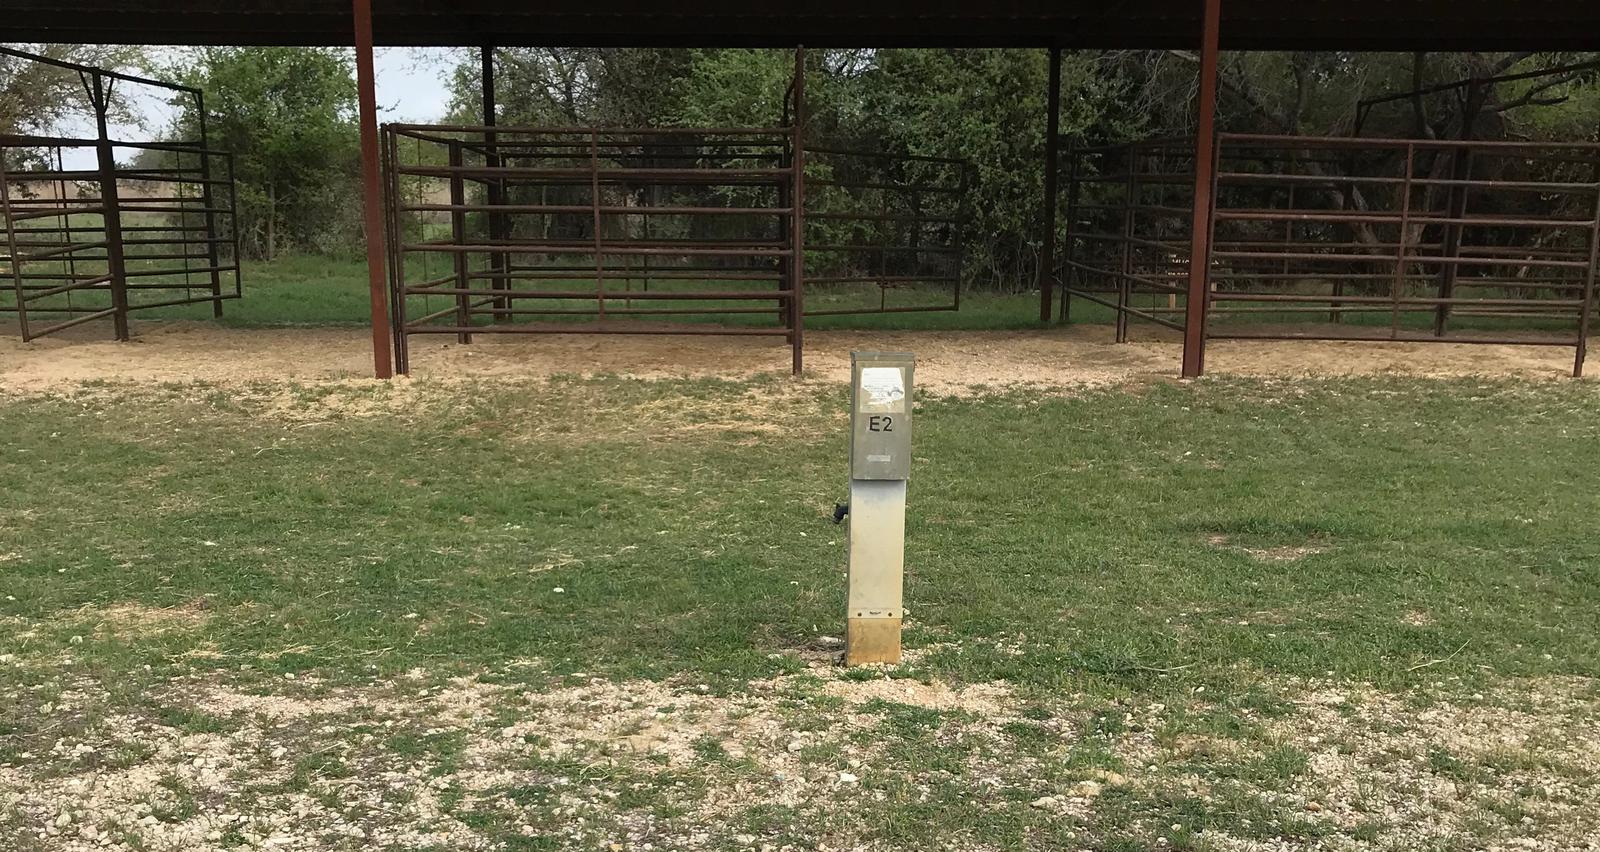 Equestrian site hookup with two stalls and restroom/shower facility nearby